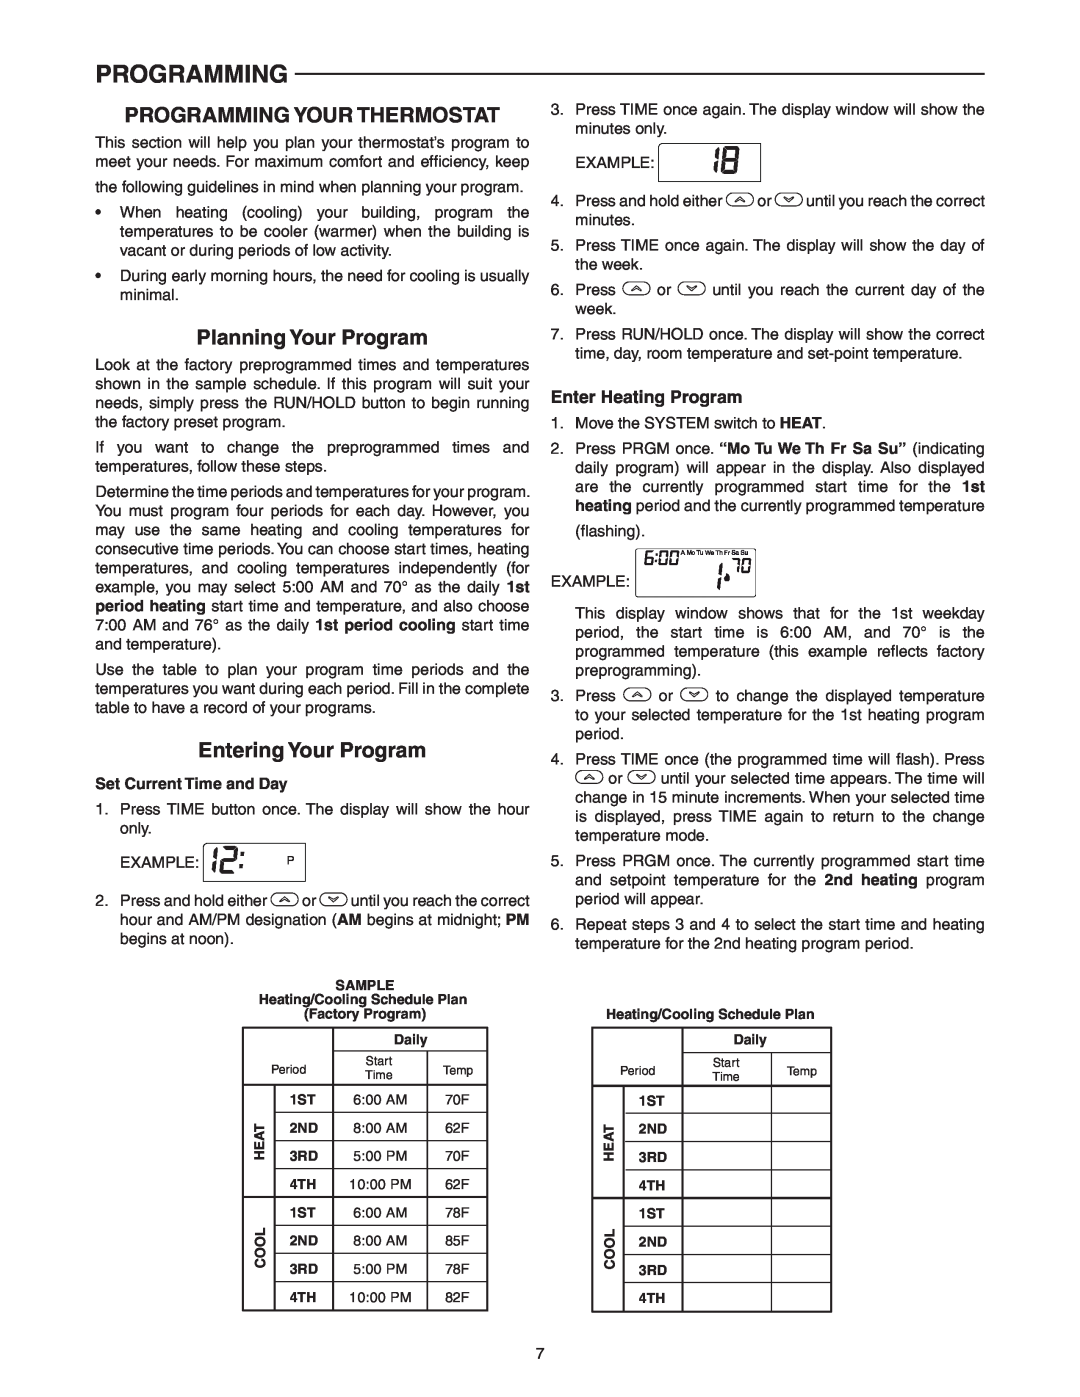 White Rodgers 1F80-0224 specifications Programming Your Thermostat, Planning Your Program, Entering Your Program 